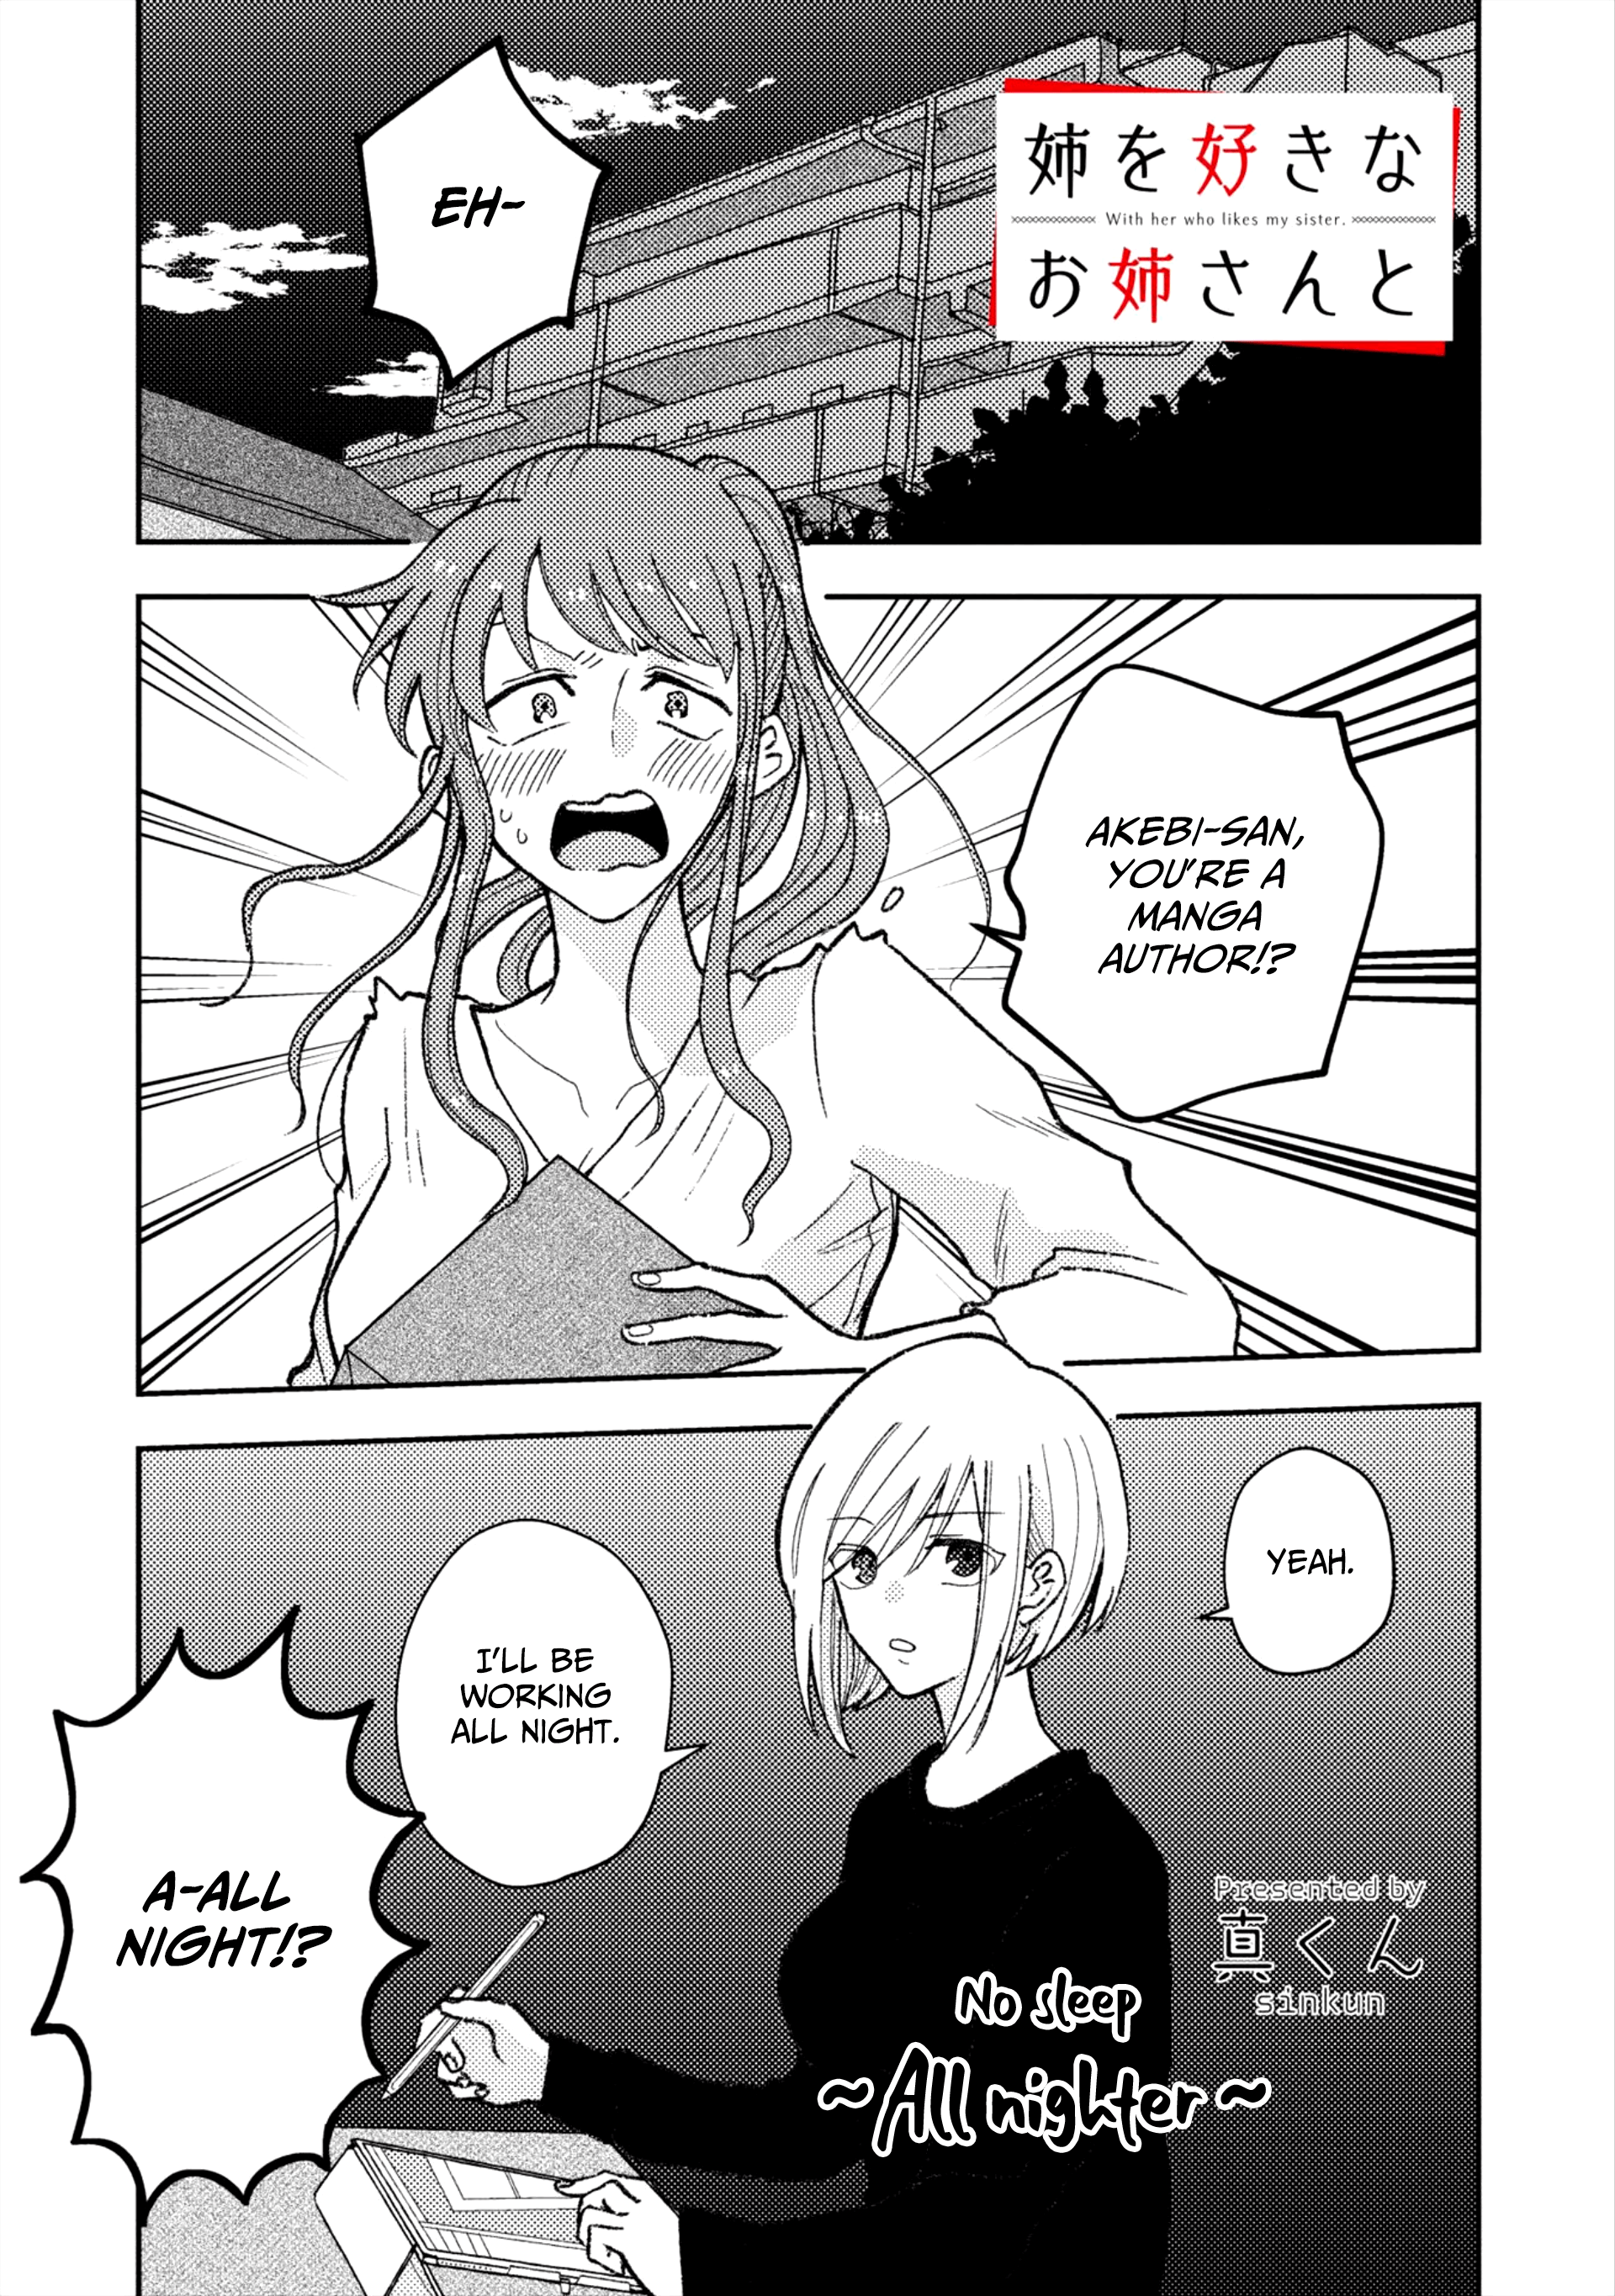 With Her Who Likes My Sister Vol.1 Chapter 2: Akebi's Job - Picture 1